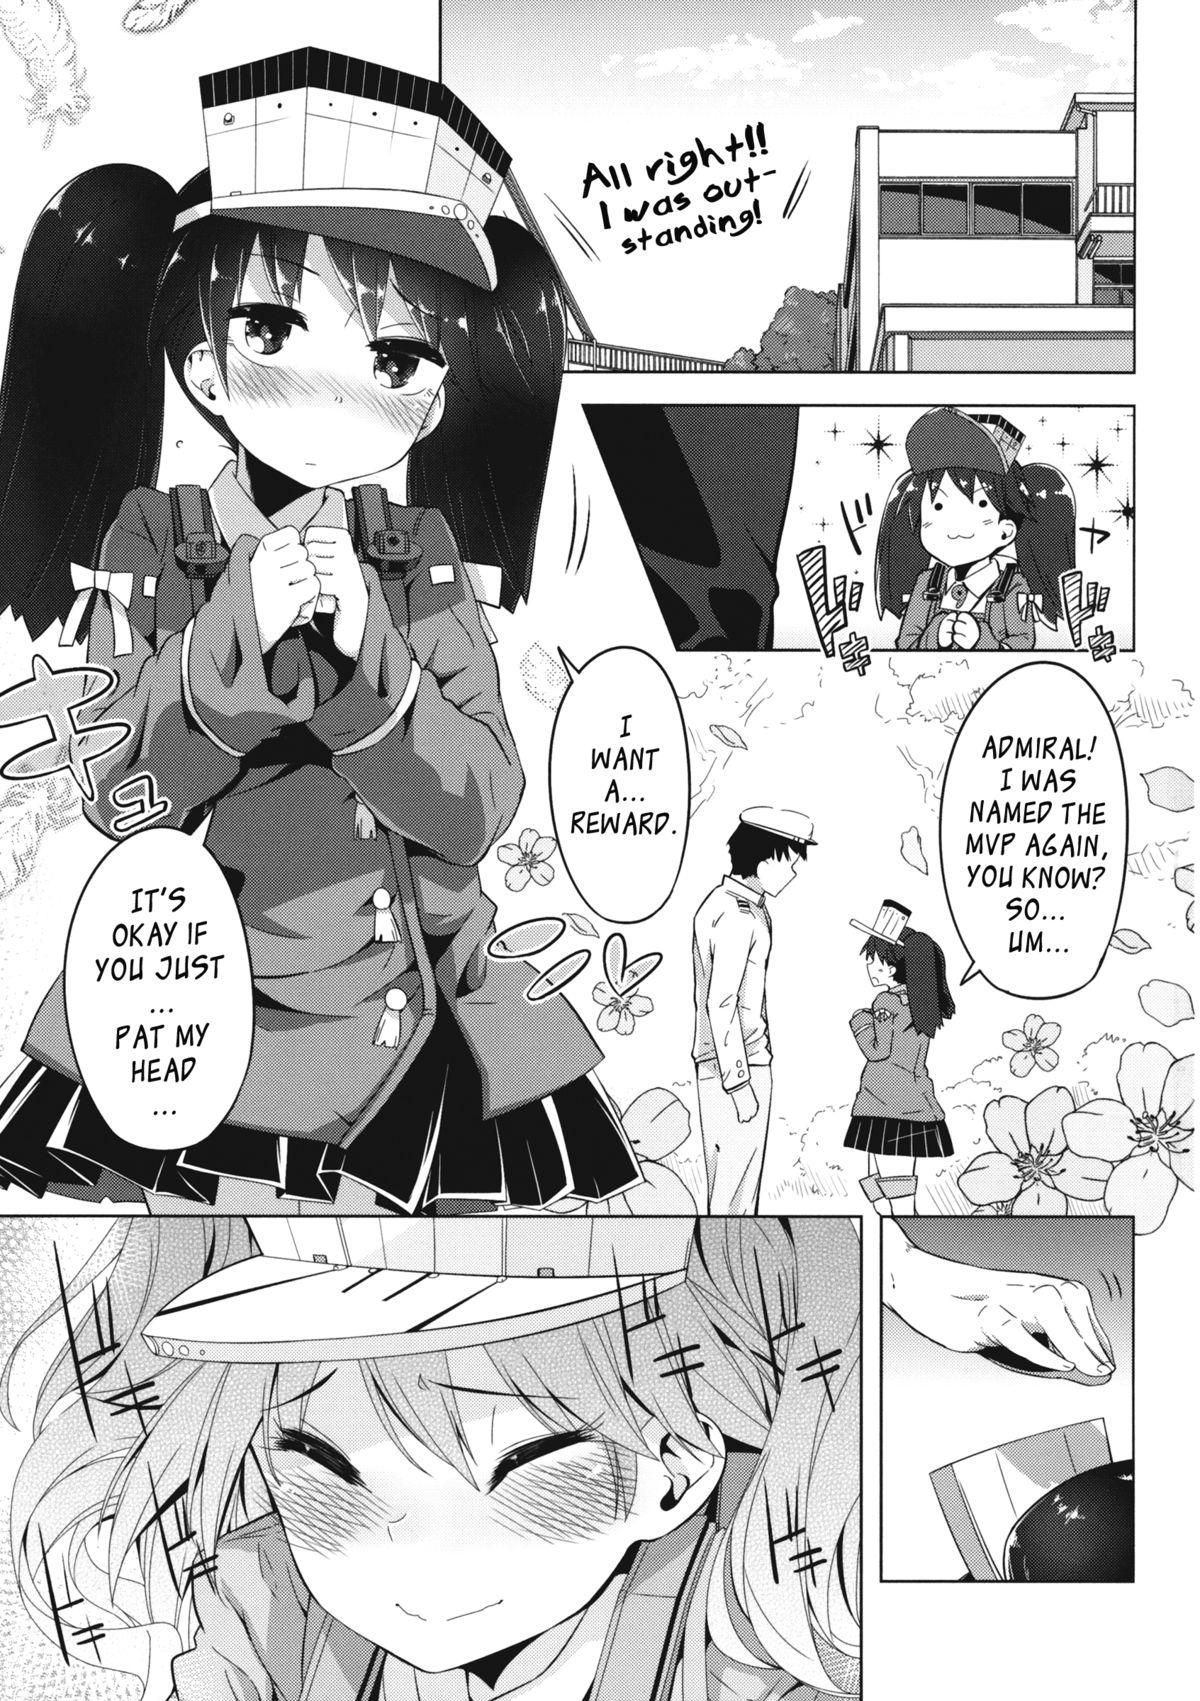 Bedroom Koi suru Otome no Miryoku wa Mune dake janai! | The Allure of a Maiden in Love isn't Only in Her Chest! - Kantai collection Office - Page 2